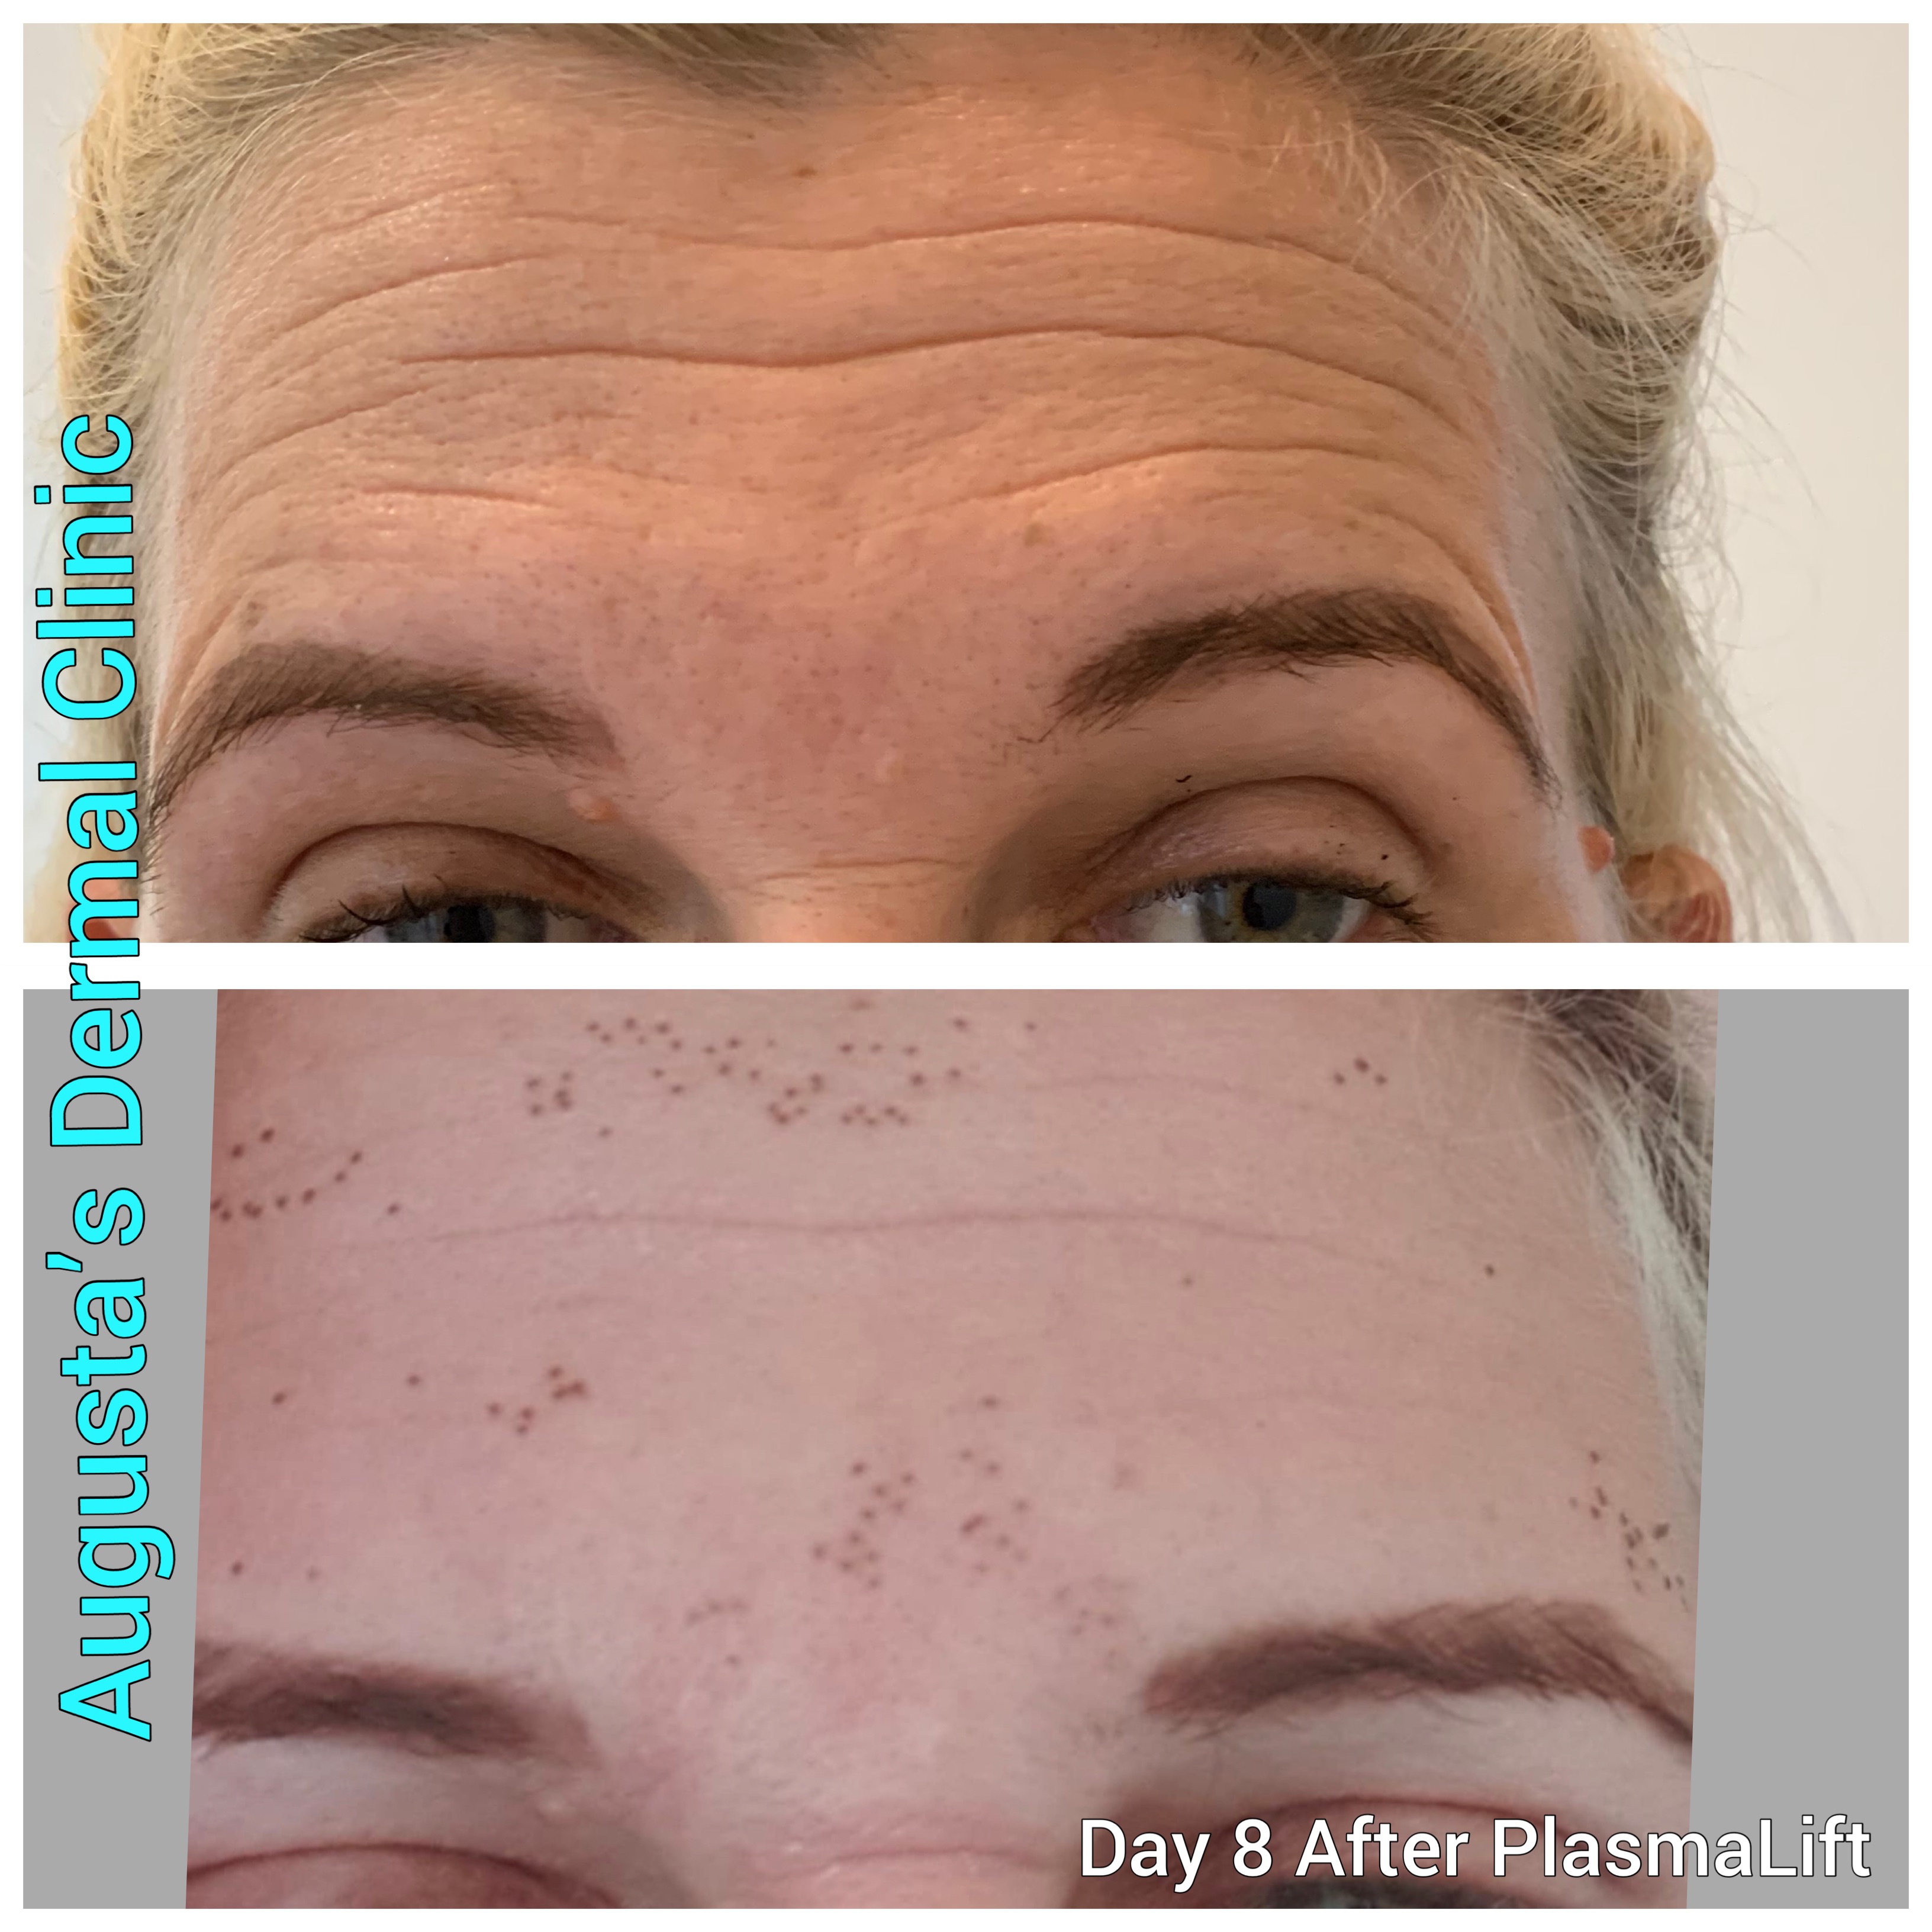 Shanna has had PlasmaLift Before & After 8 days